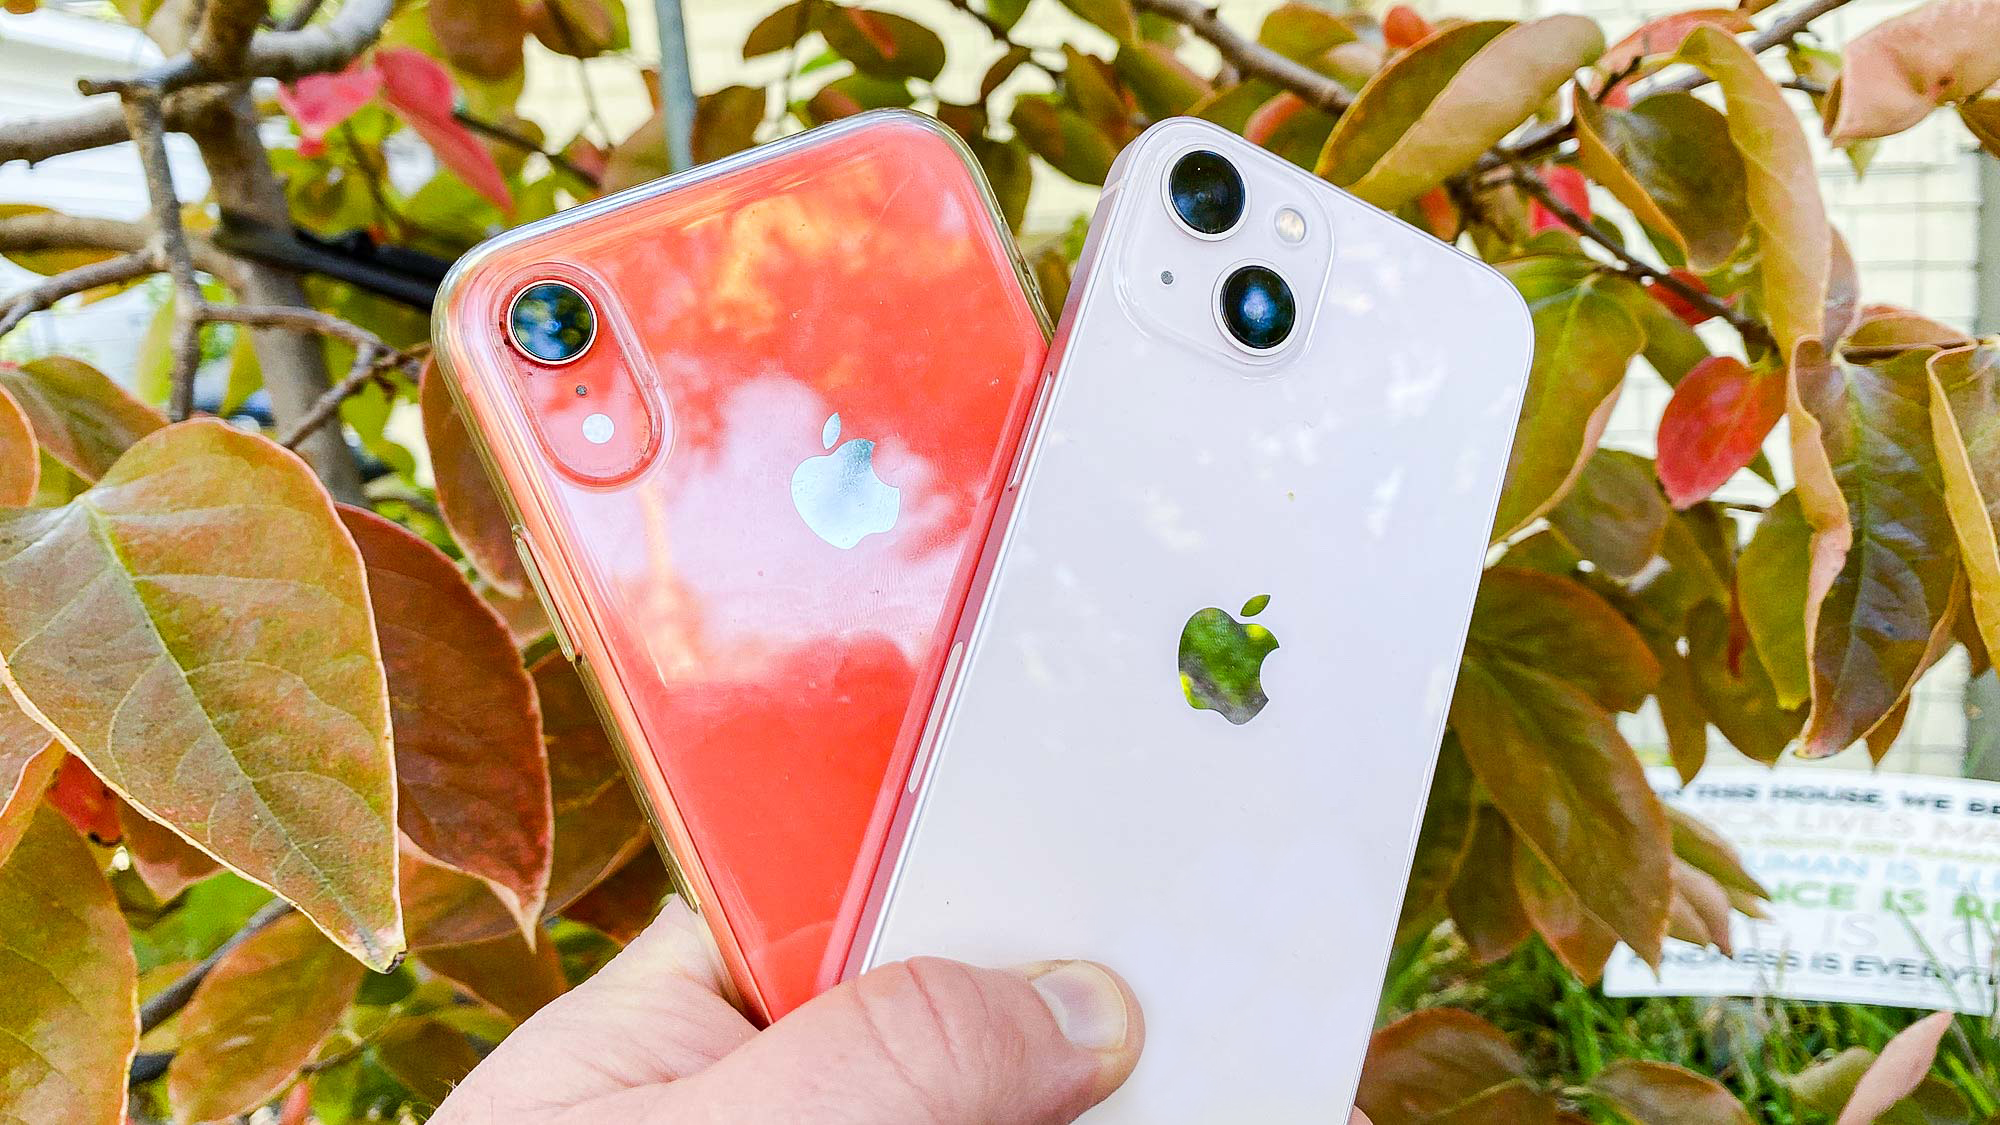 professioneel Verrassend genoeg Manga iPhone 13 vs. iPhone XR camera face-off: How much better is the new iPhone?  | Tom's Guide